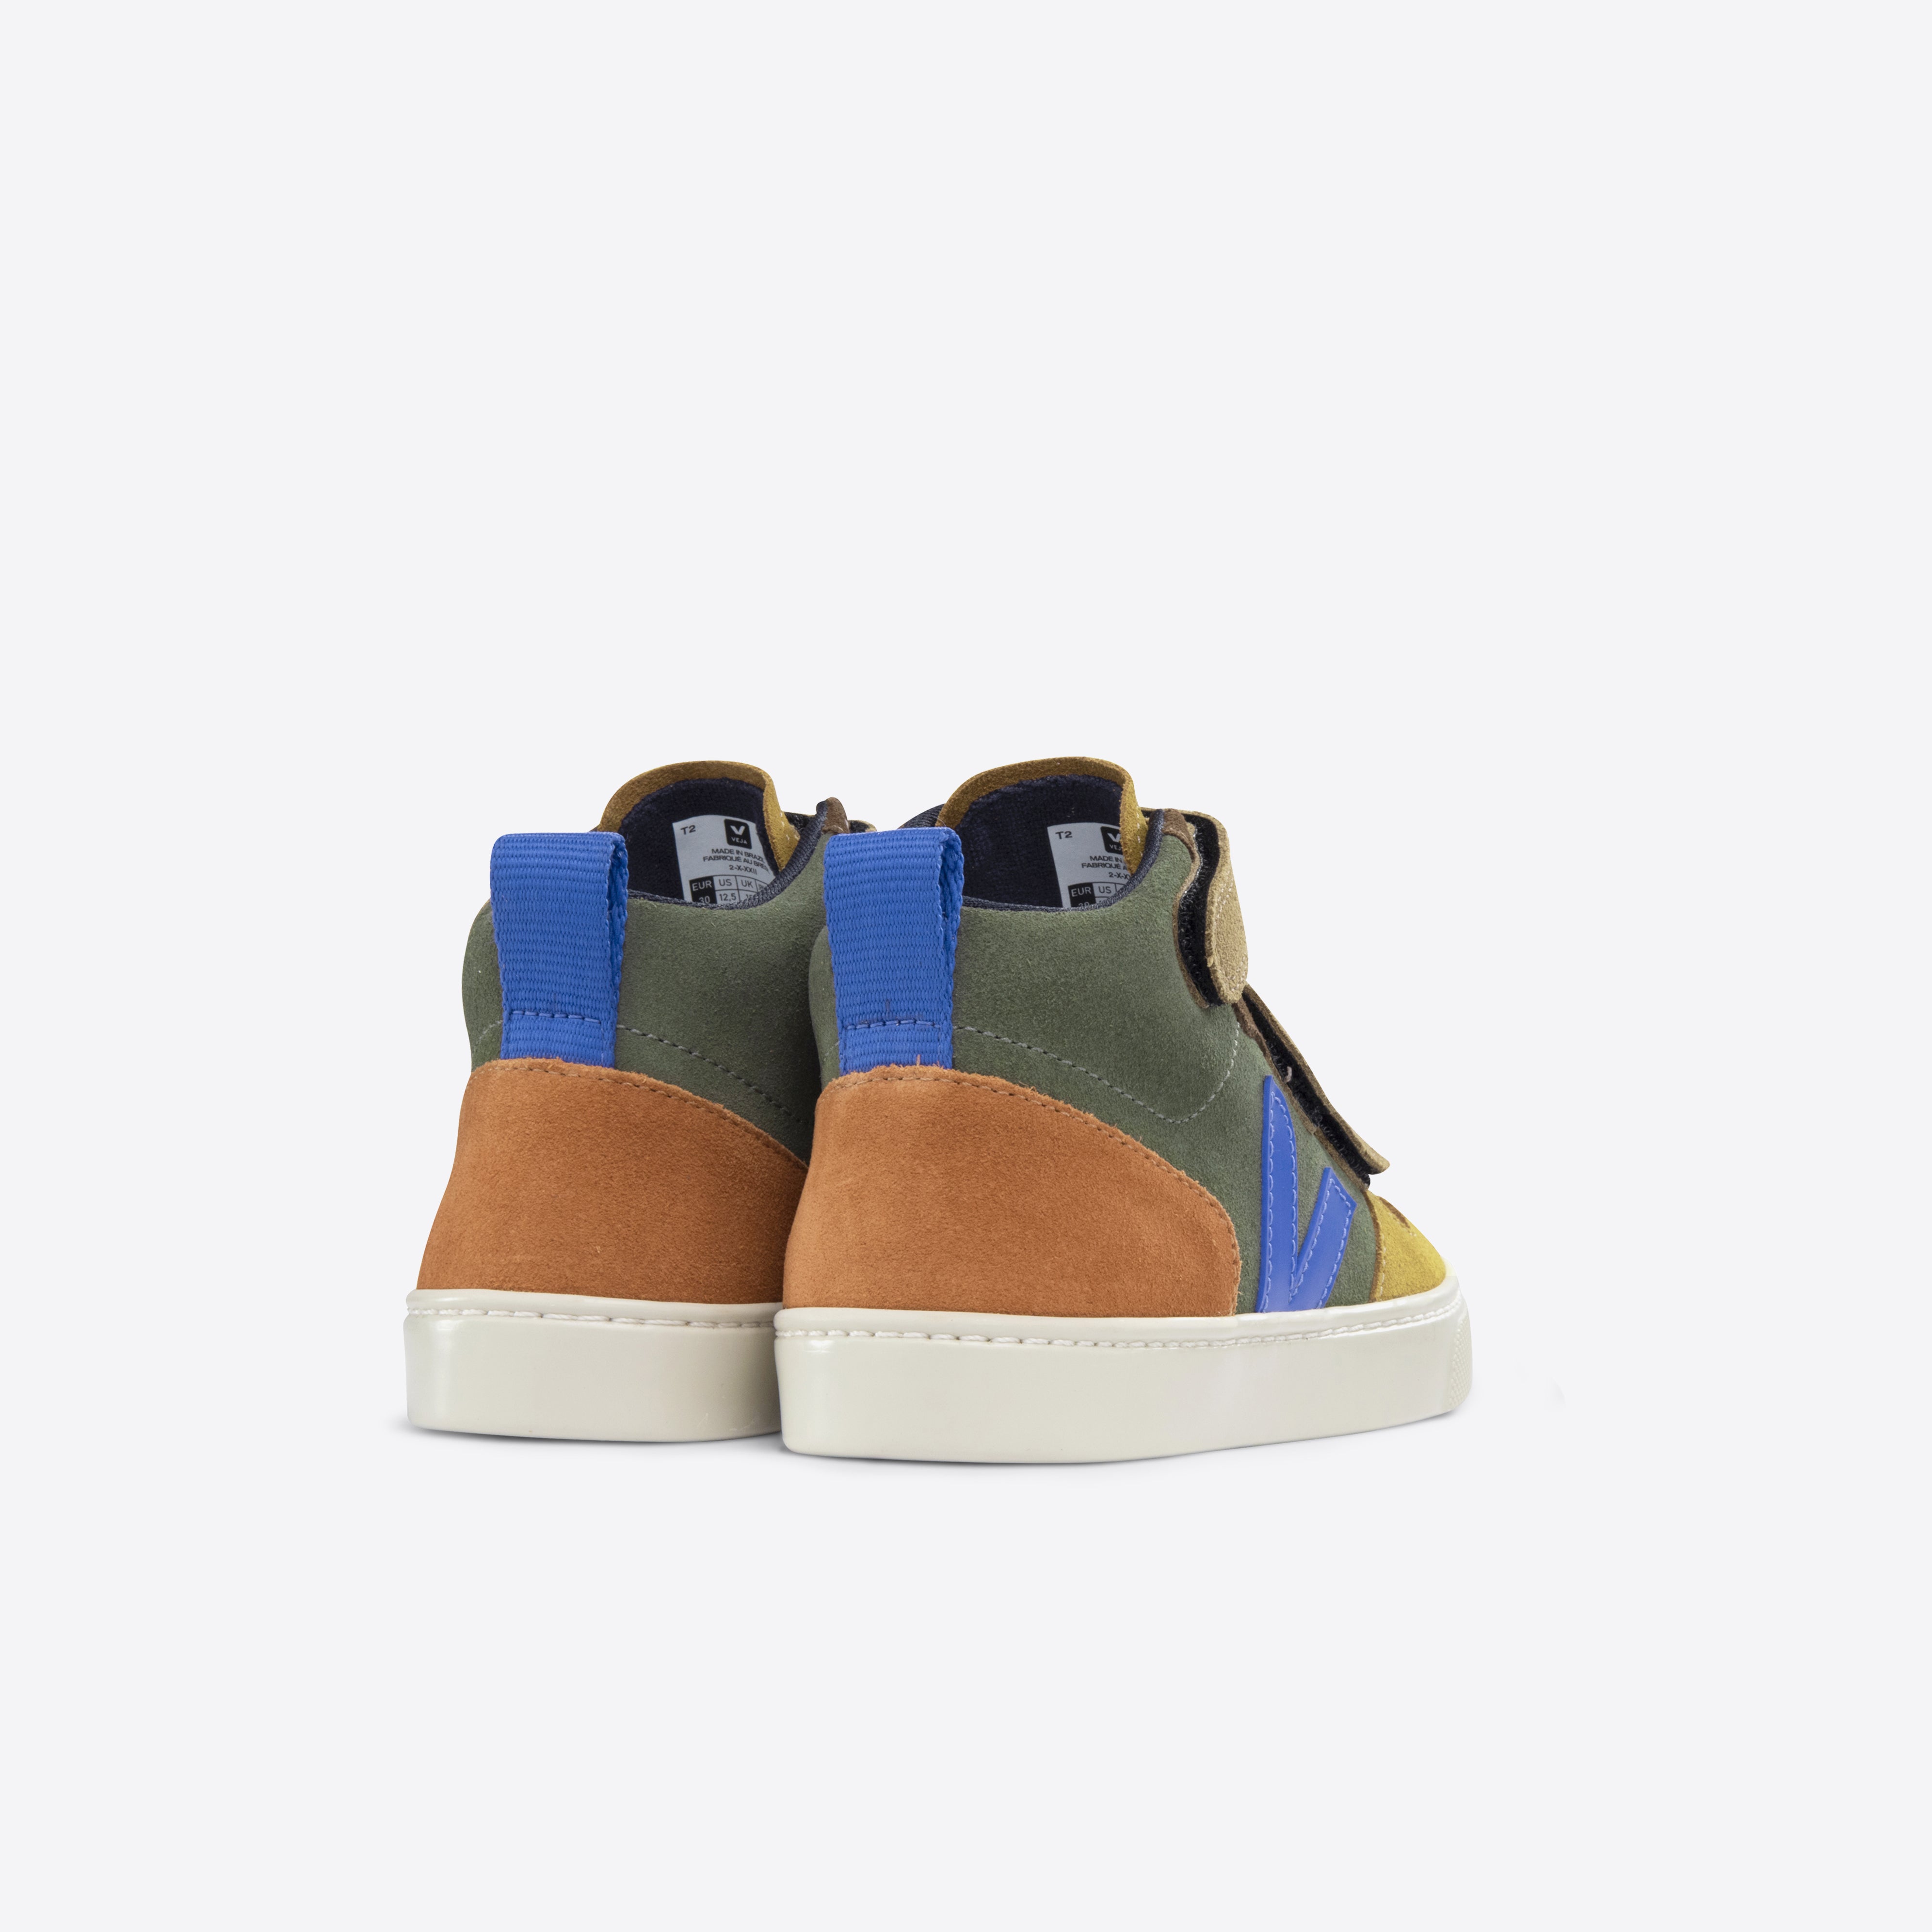 Boys & Girls Multicolor "SMALL V-10" Shoes